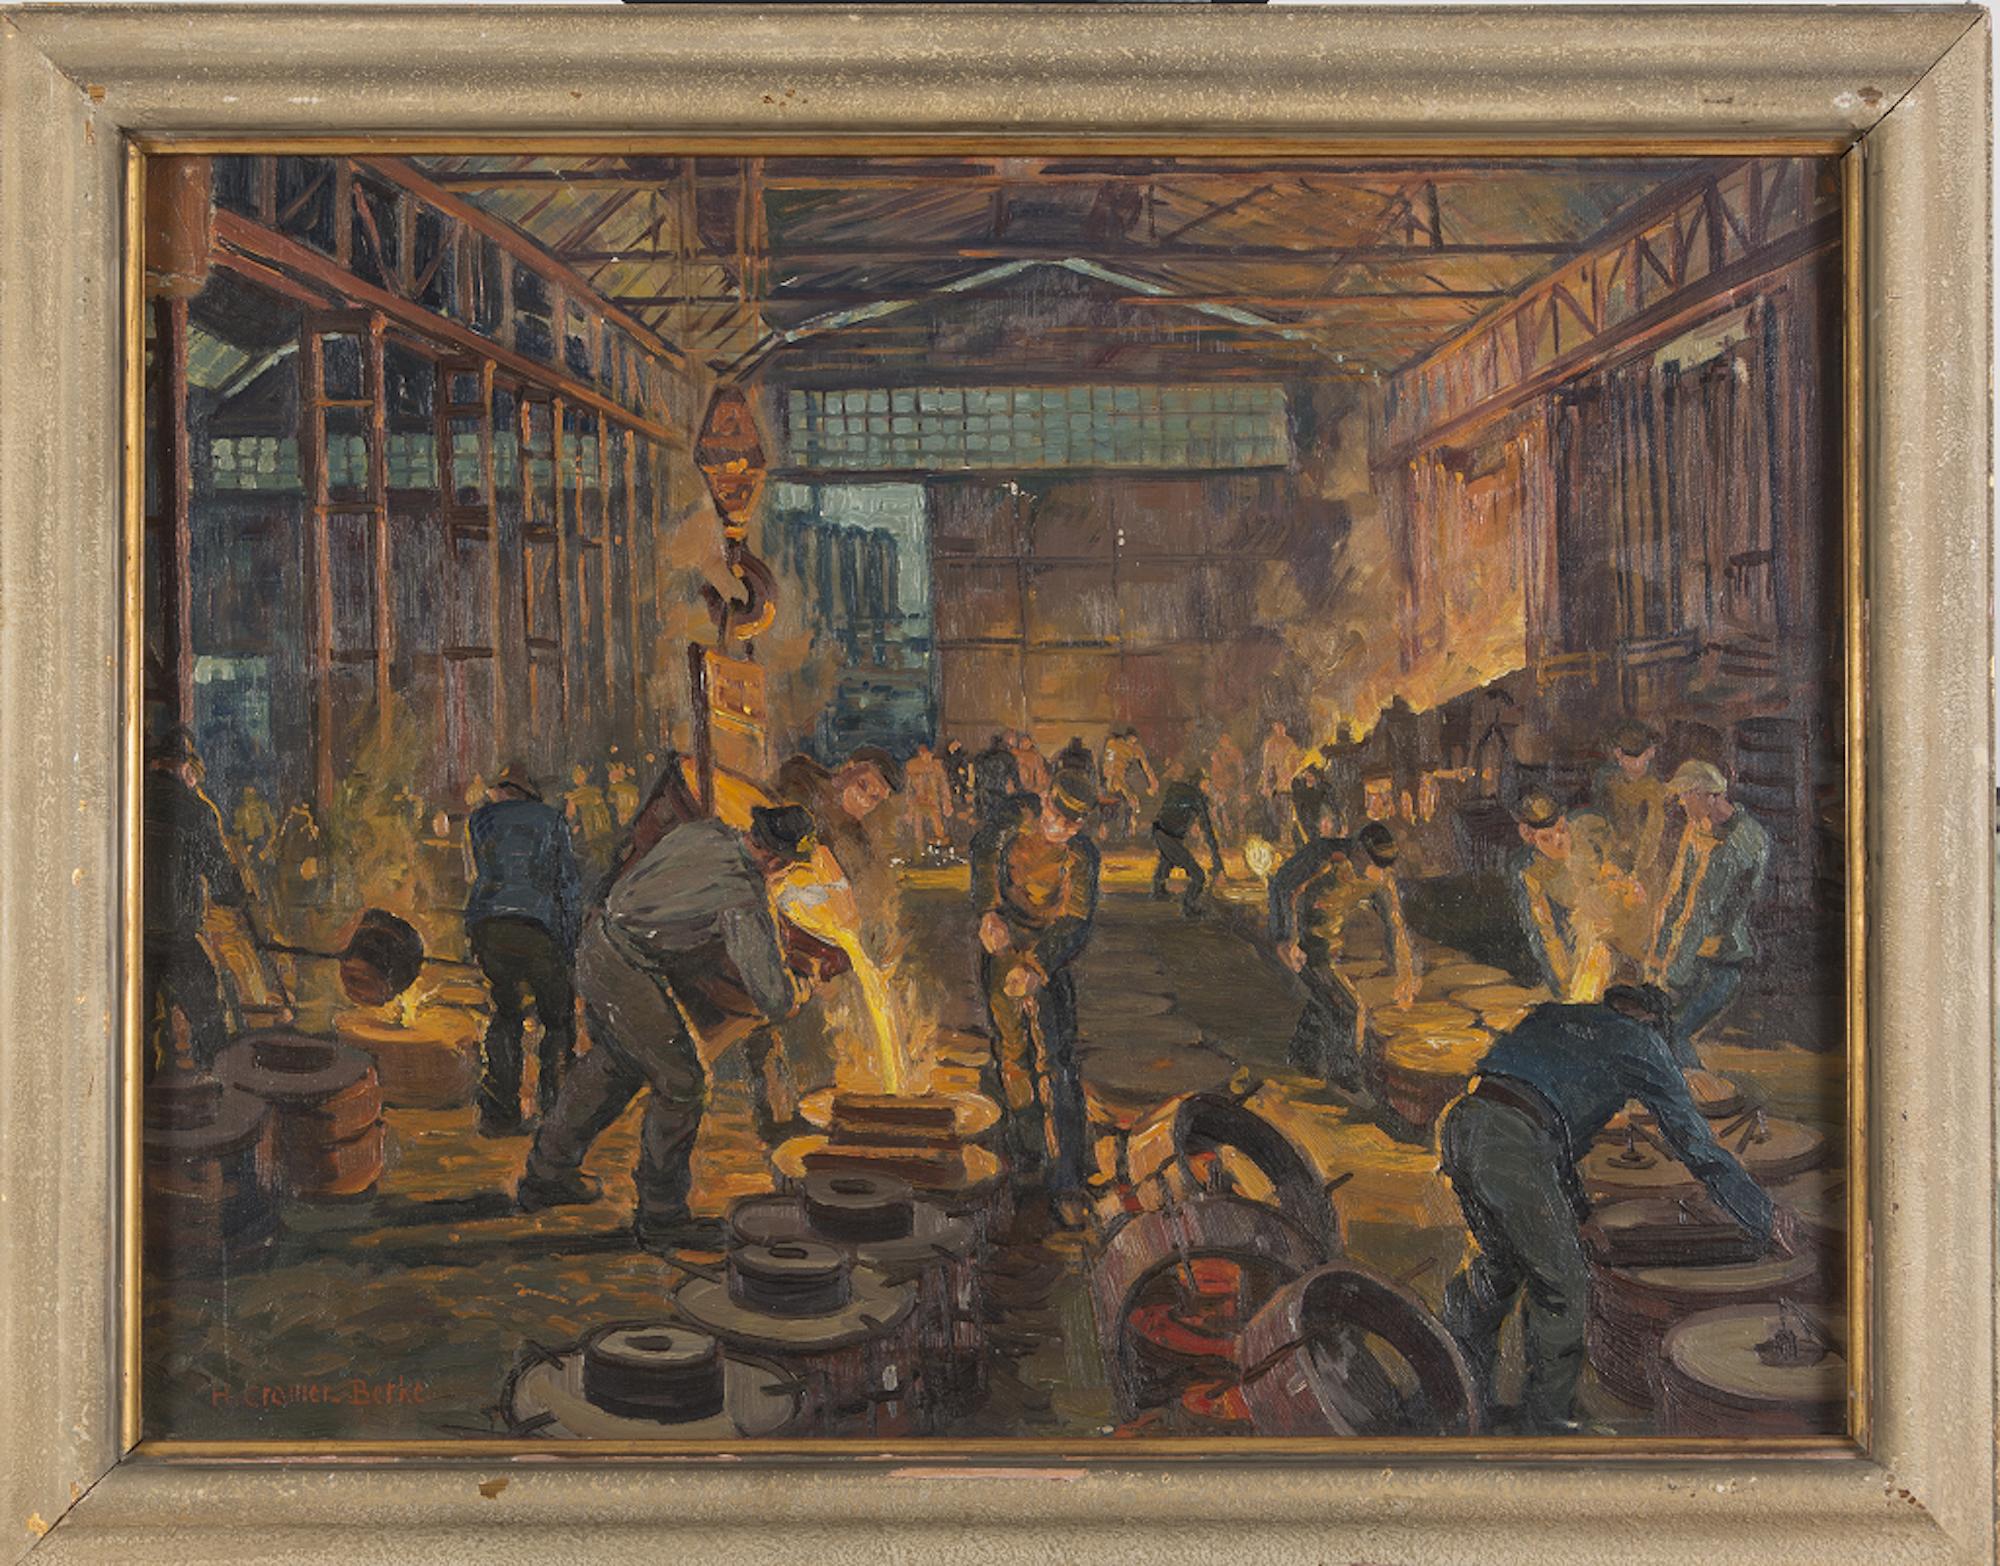 Interior of a Foundry - Original Oil on Canvas by H. C. Berke - Mid 1900 - Painting by Hubert Creme Berke